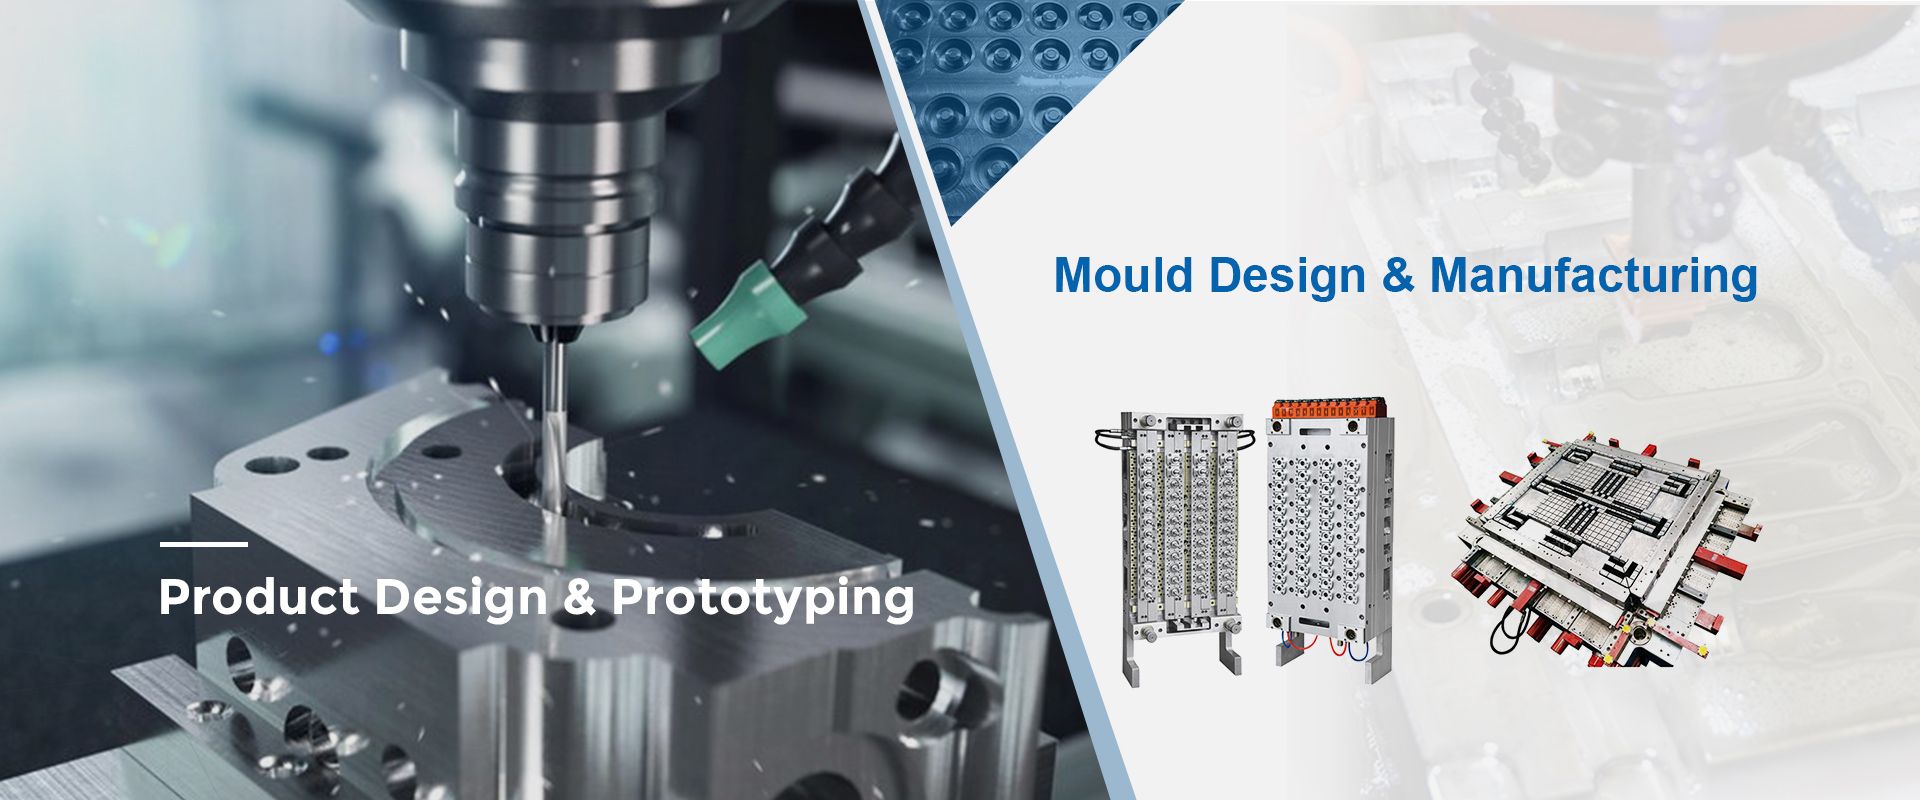 Product Design & Prototyping Mould Design and Manufacturing